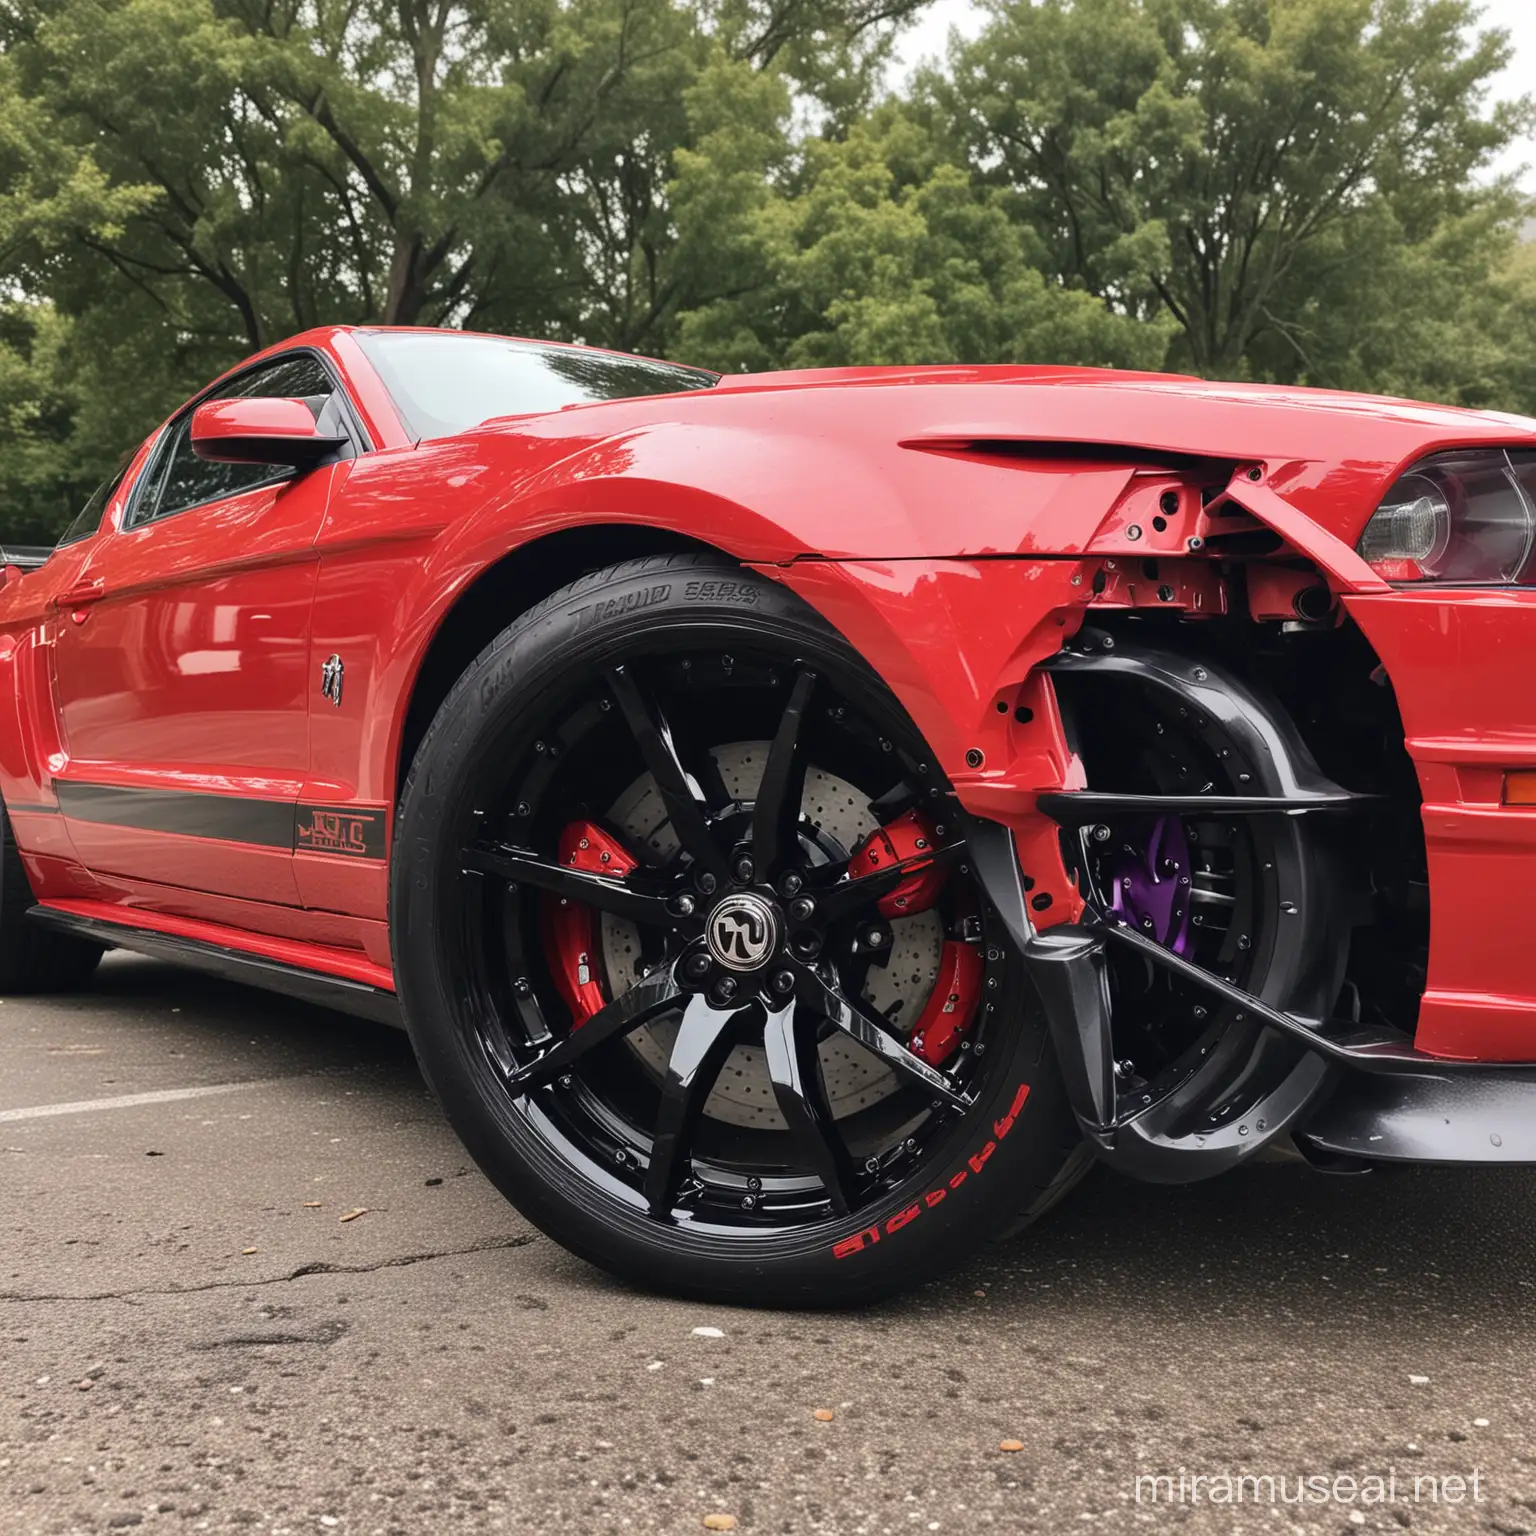 red mustang car with black rims and purple caliper

